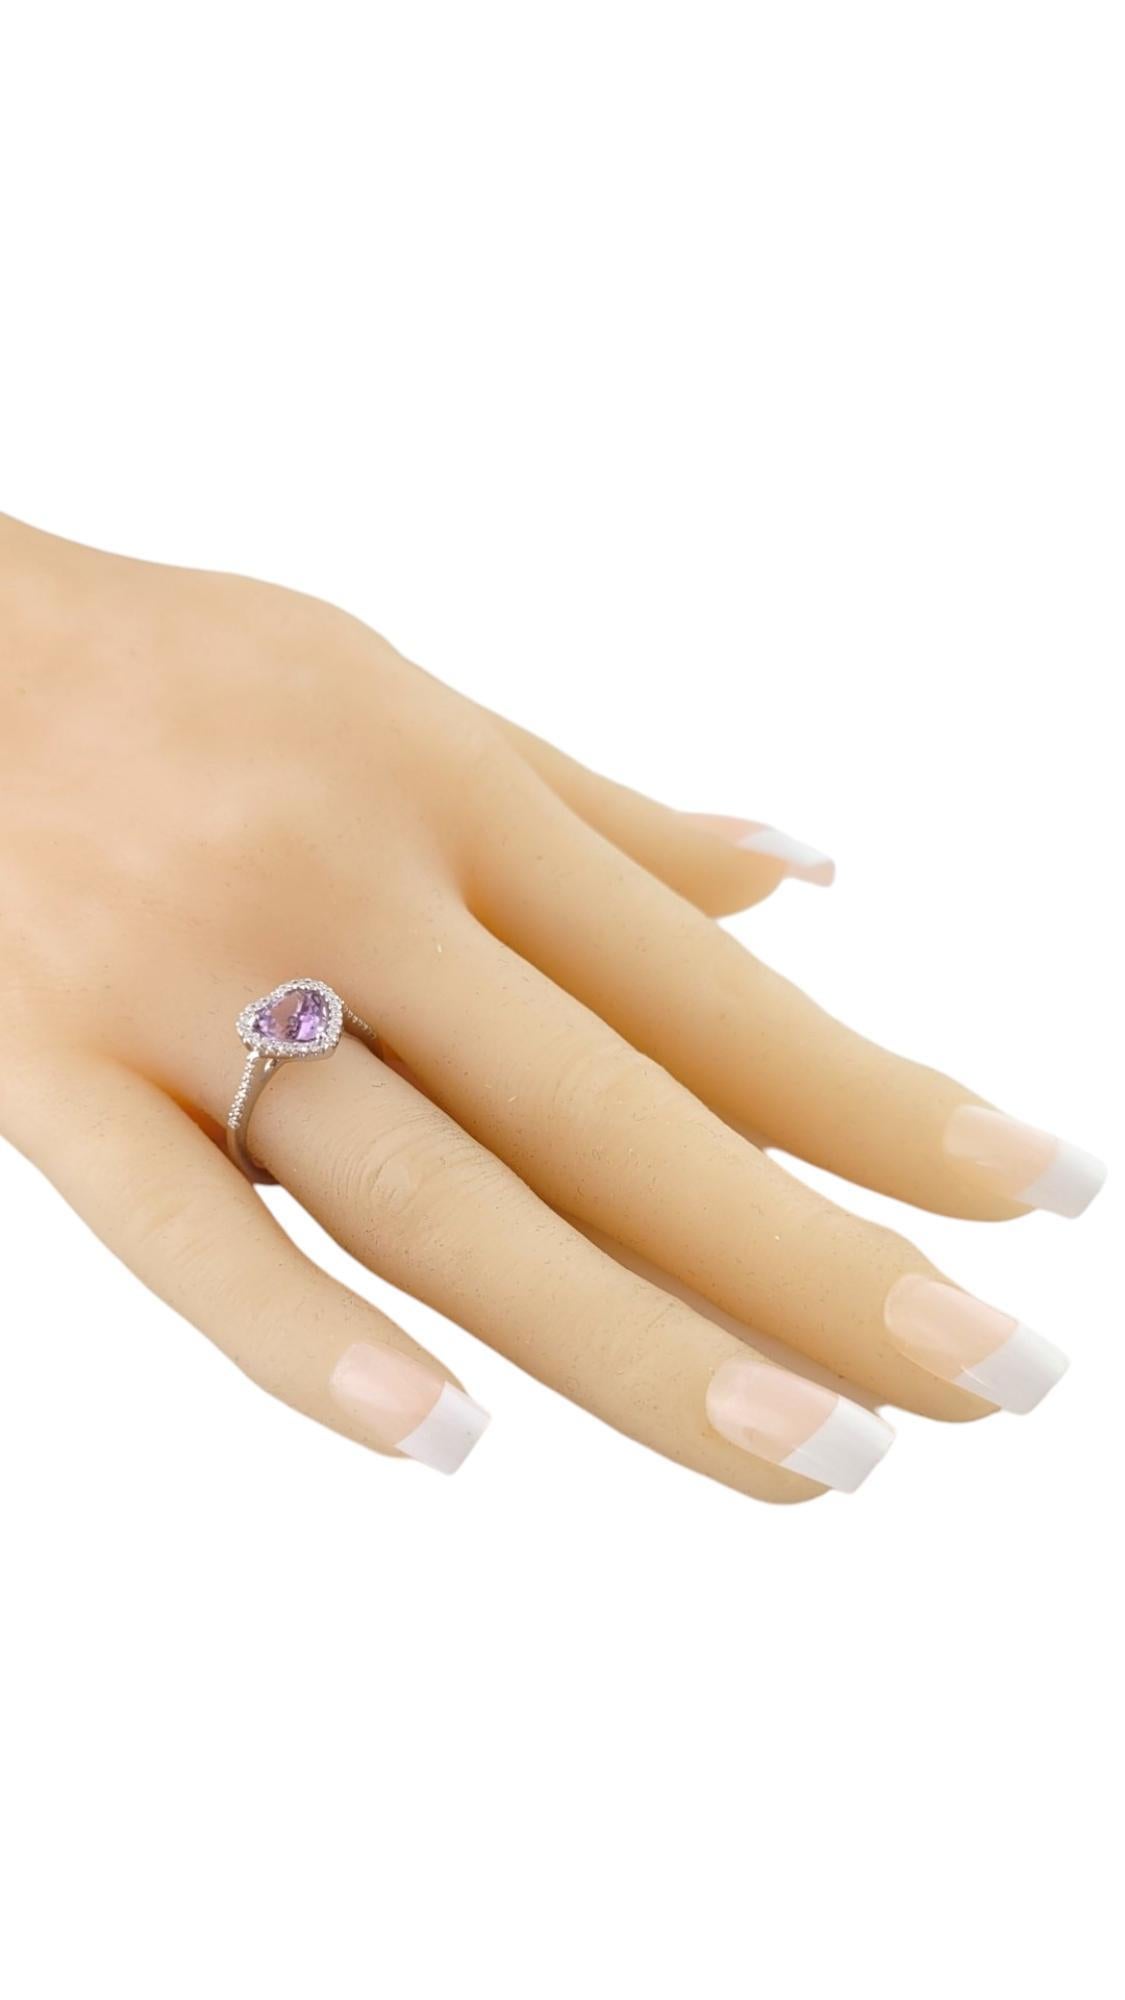 18K White Gold Diamond & Amethyst Heart Halo Ring Size 6.5 #16289 For Sale 2